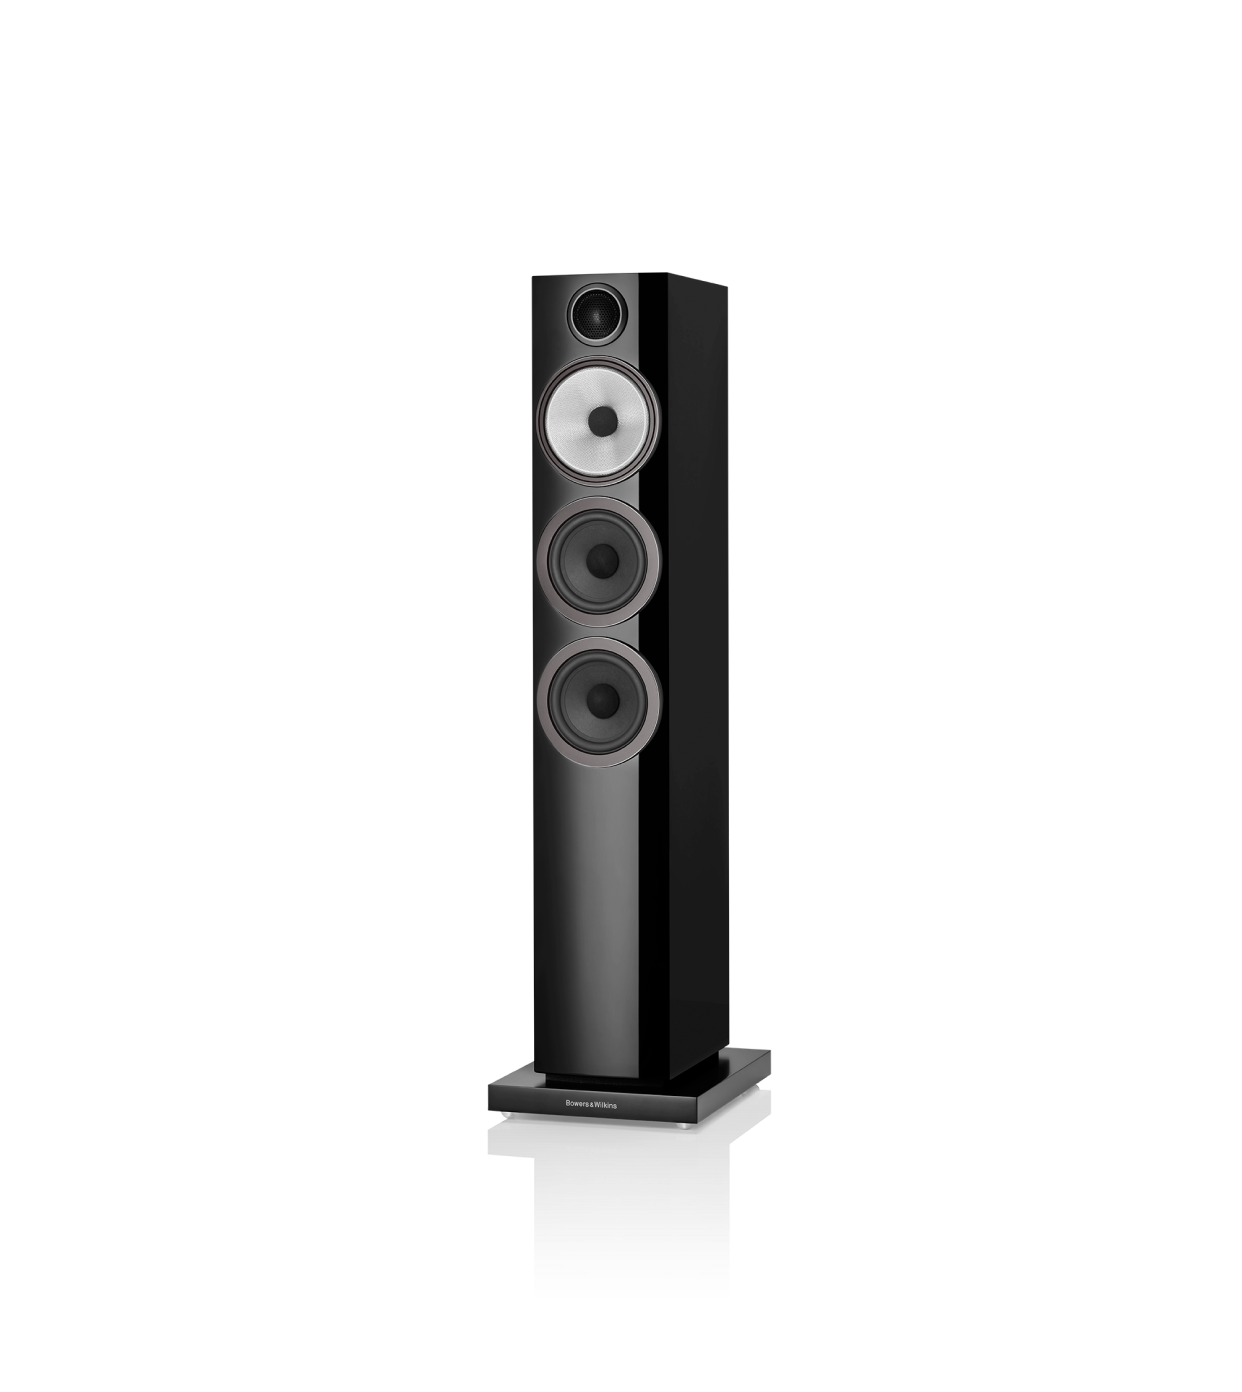 The slimmest tower loudspeaker Bowers & Wilkins makes, 704 S3 packs a mighty punch. Its twin Aerofoil Profile bass drivers ensure ample extension and scale, while its decoupled Continuum cone FST™ driver delivers crystal clear midrange performance. Slim design, big sound!